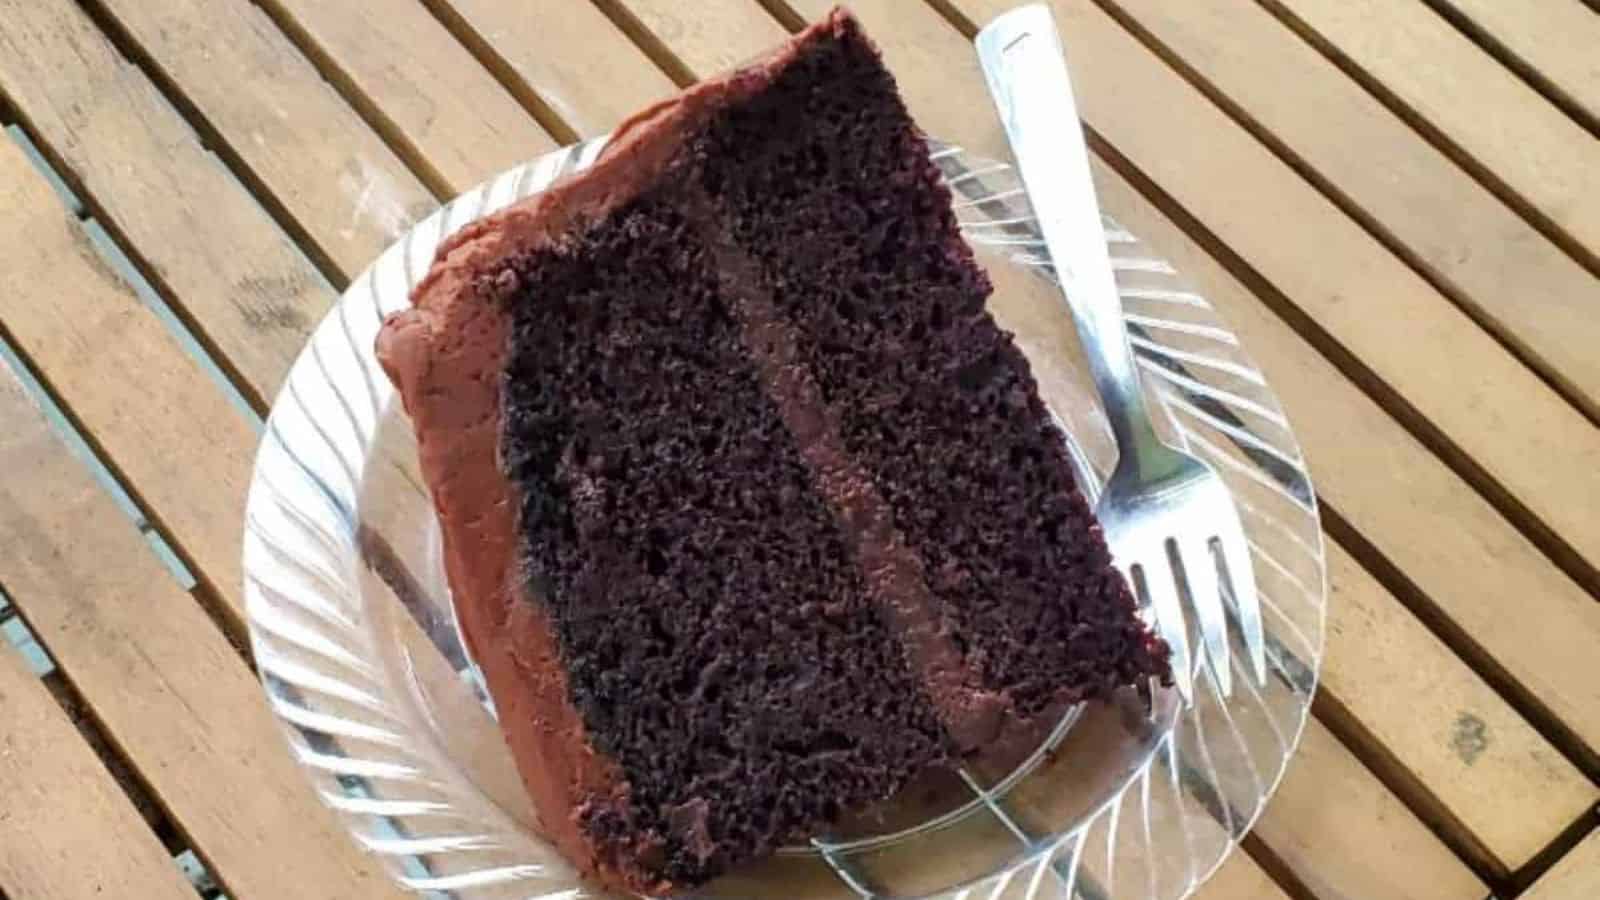 Image shows a slice of chocolate frosted chocolate cake on a plate sitting on a wooden table.